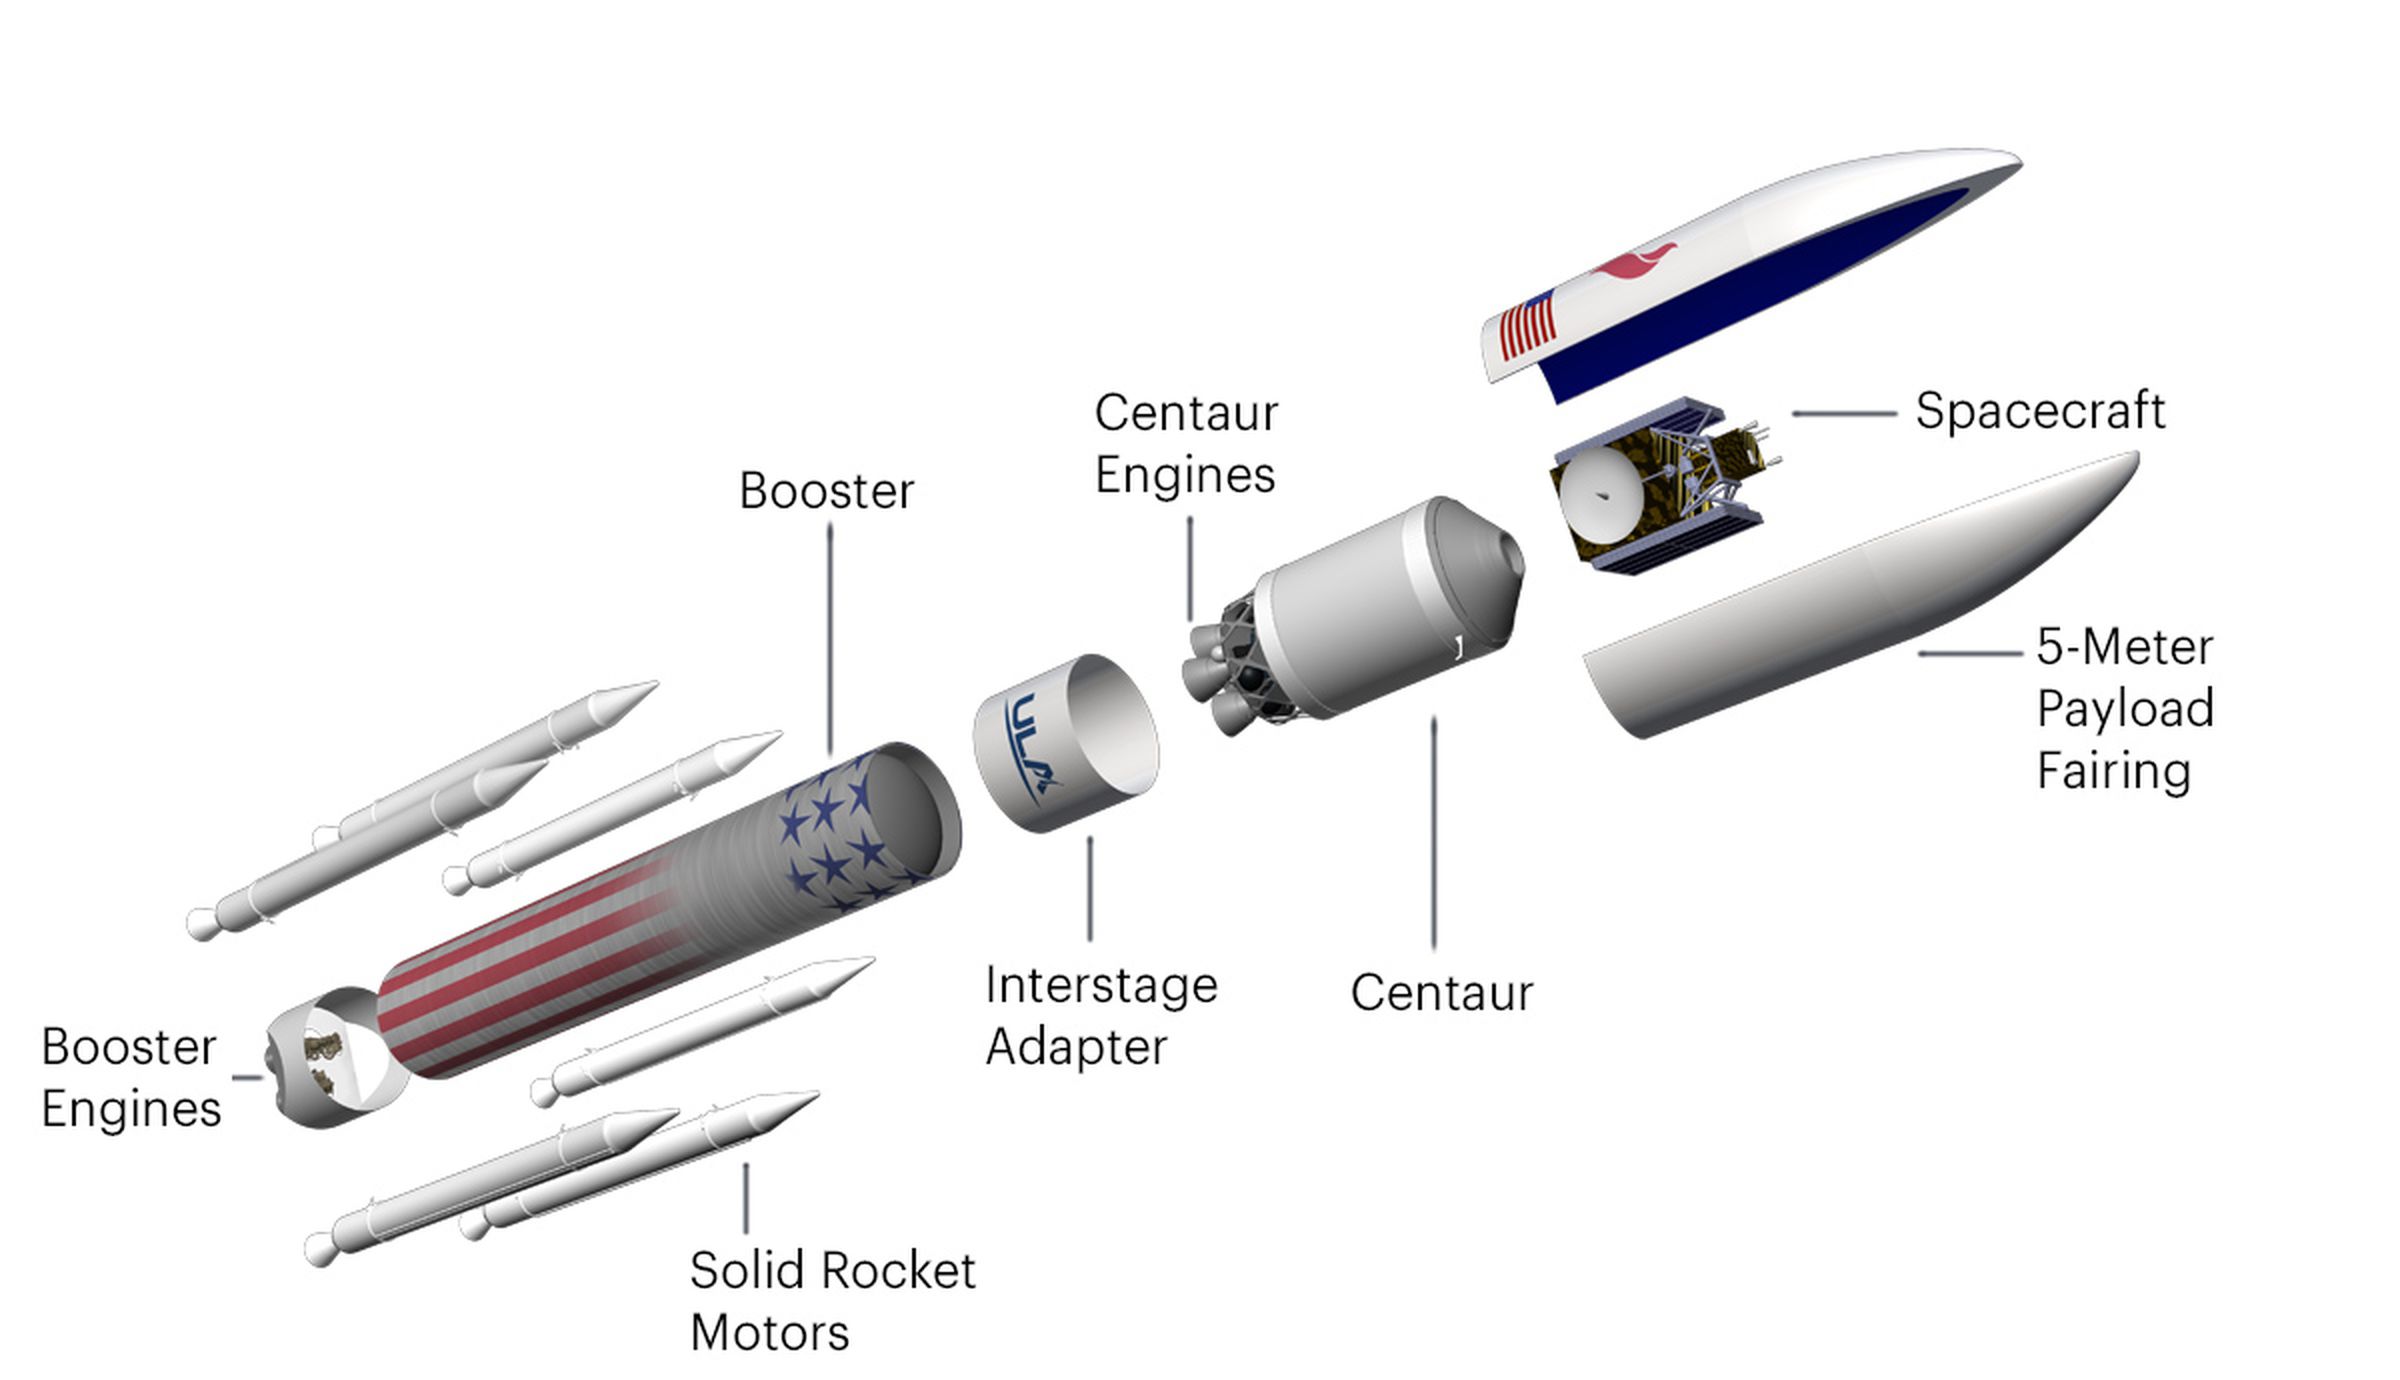 A rendering of the different parts of ULA’s Vulcan rocket